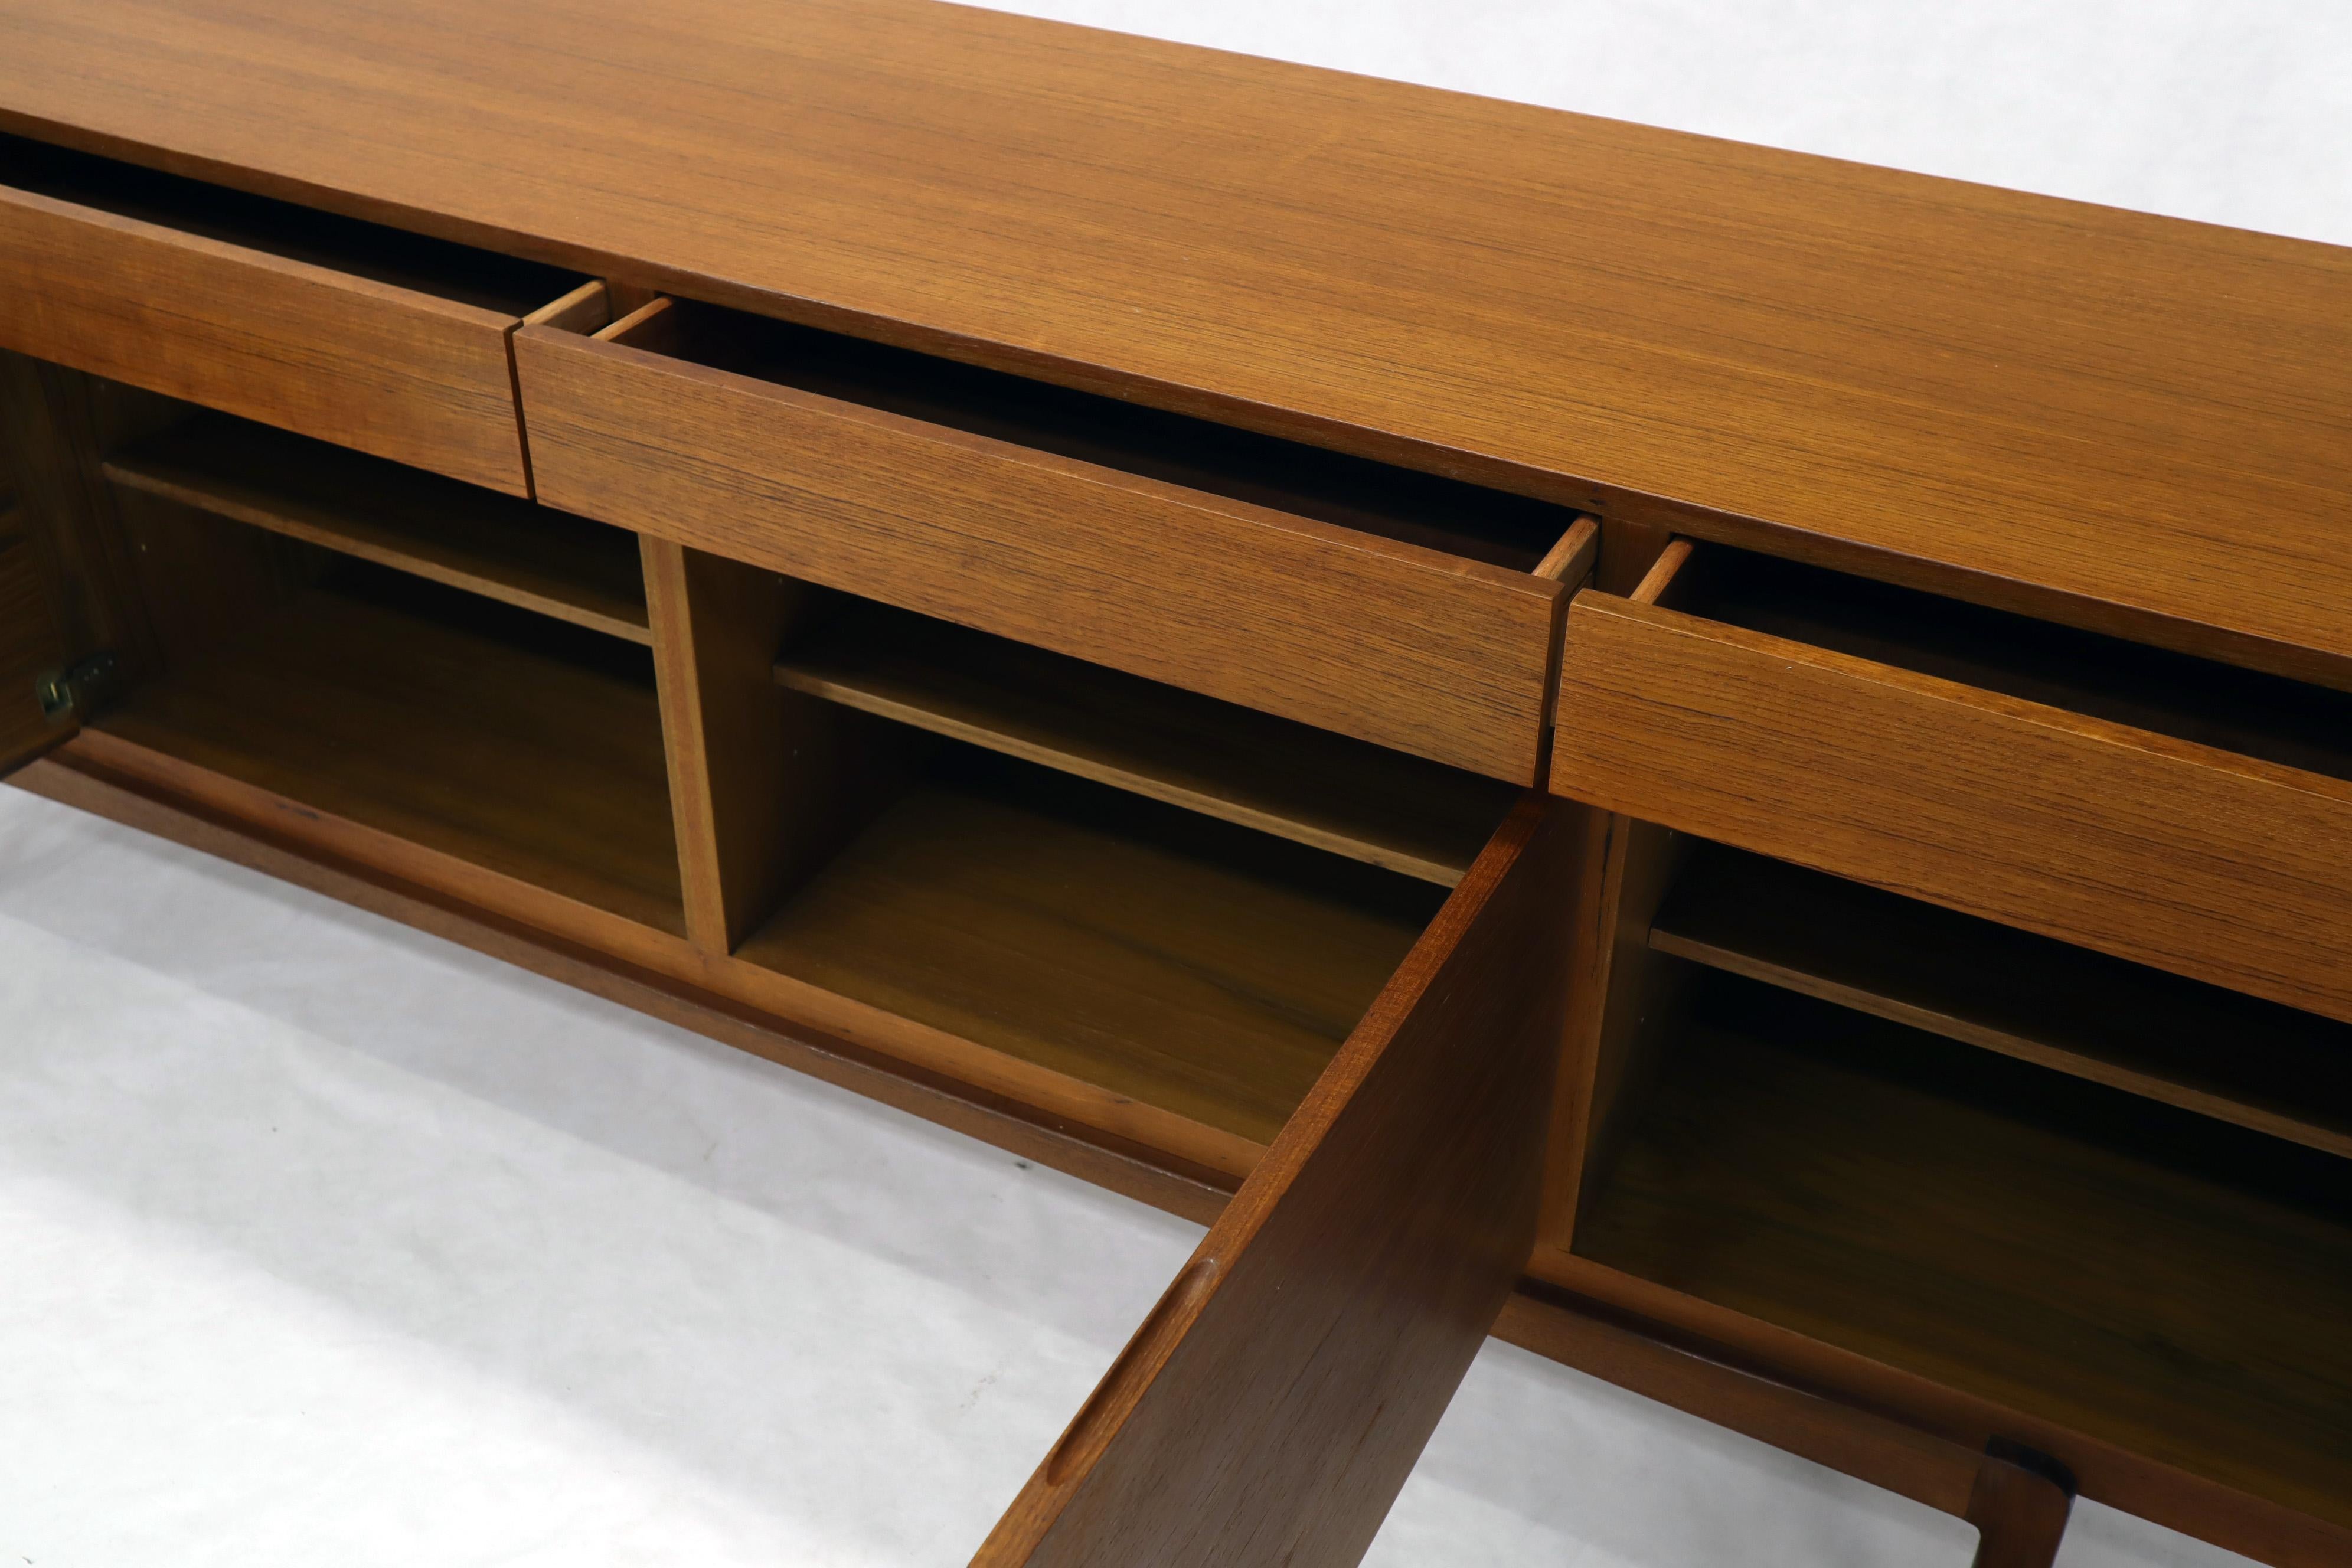 Long Low Danish Mid-Century Modern Credenza Four Doors and Drawers Compartments  1